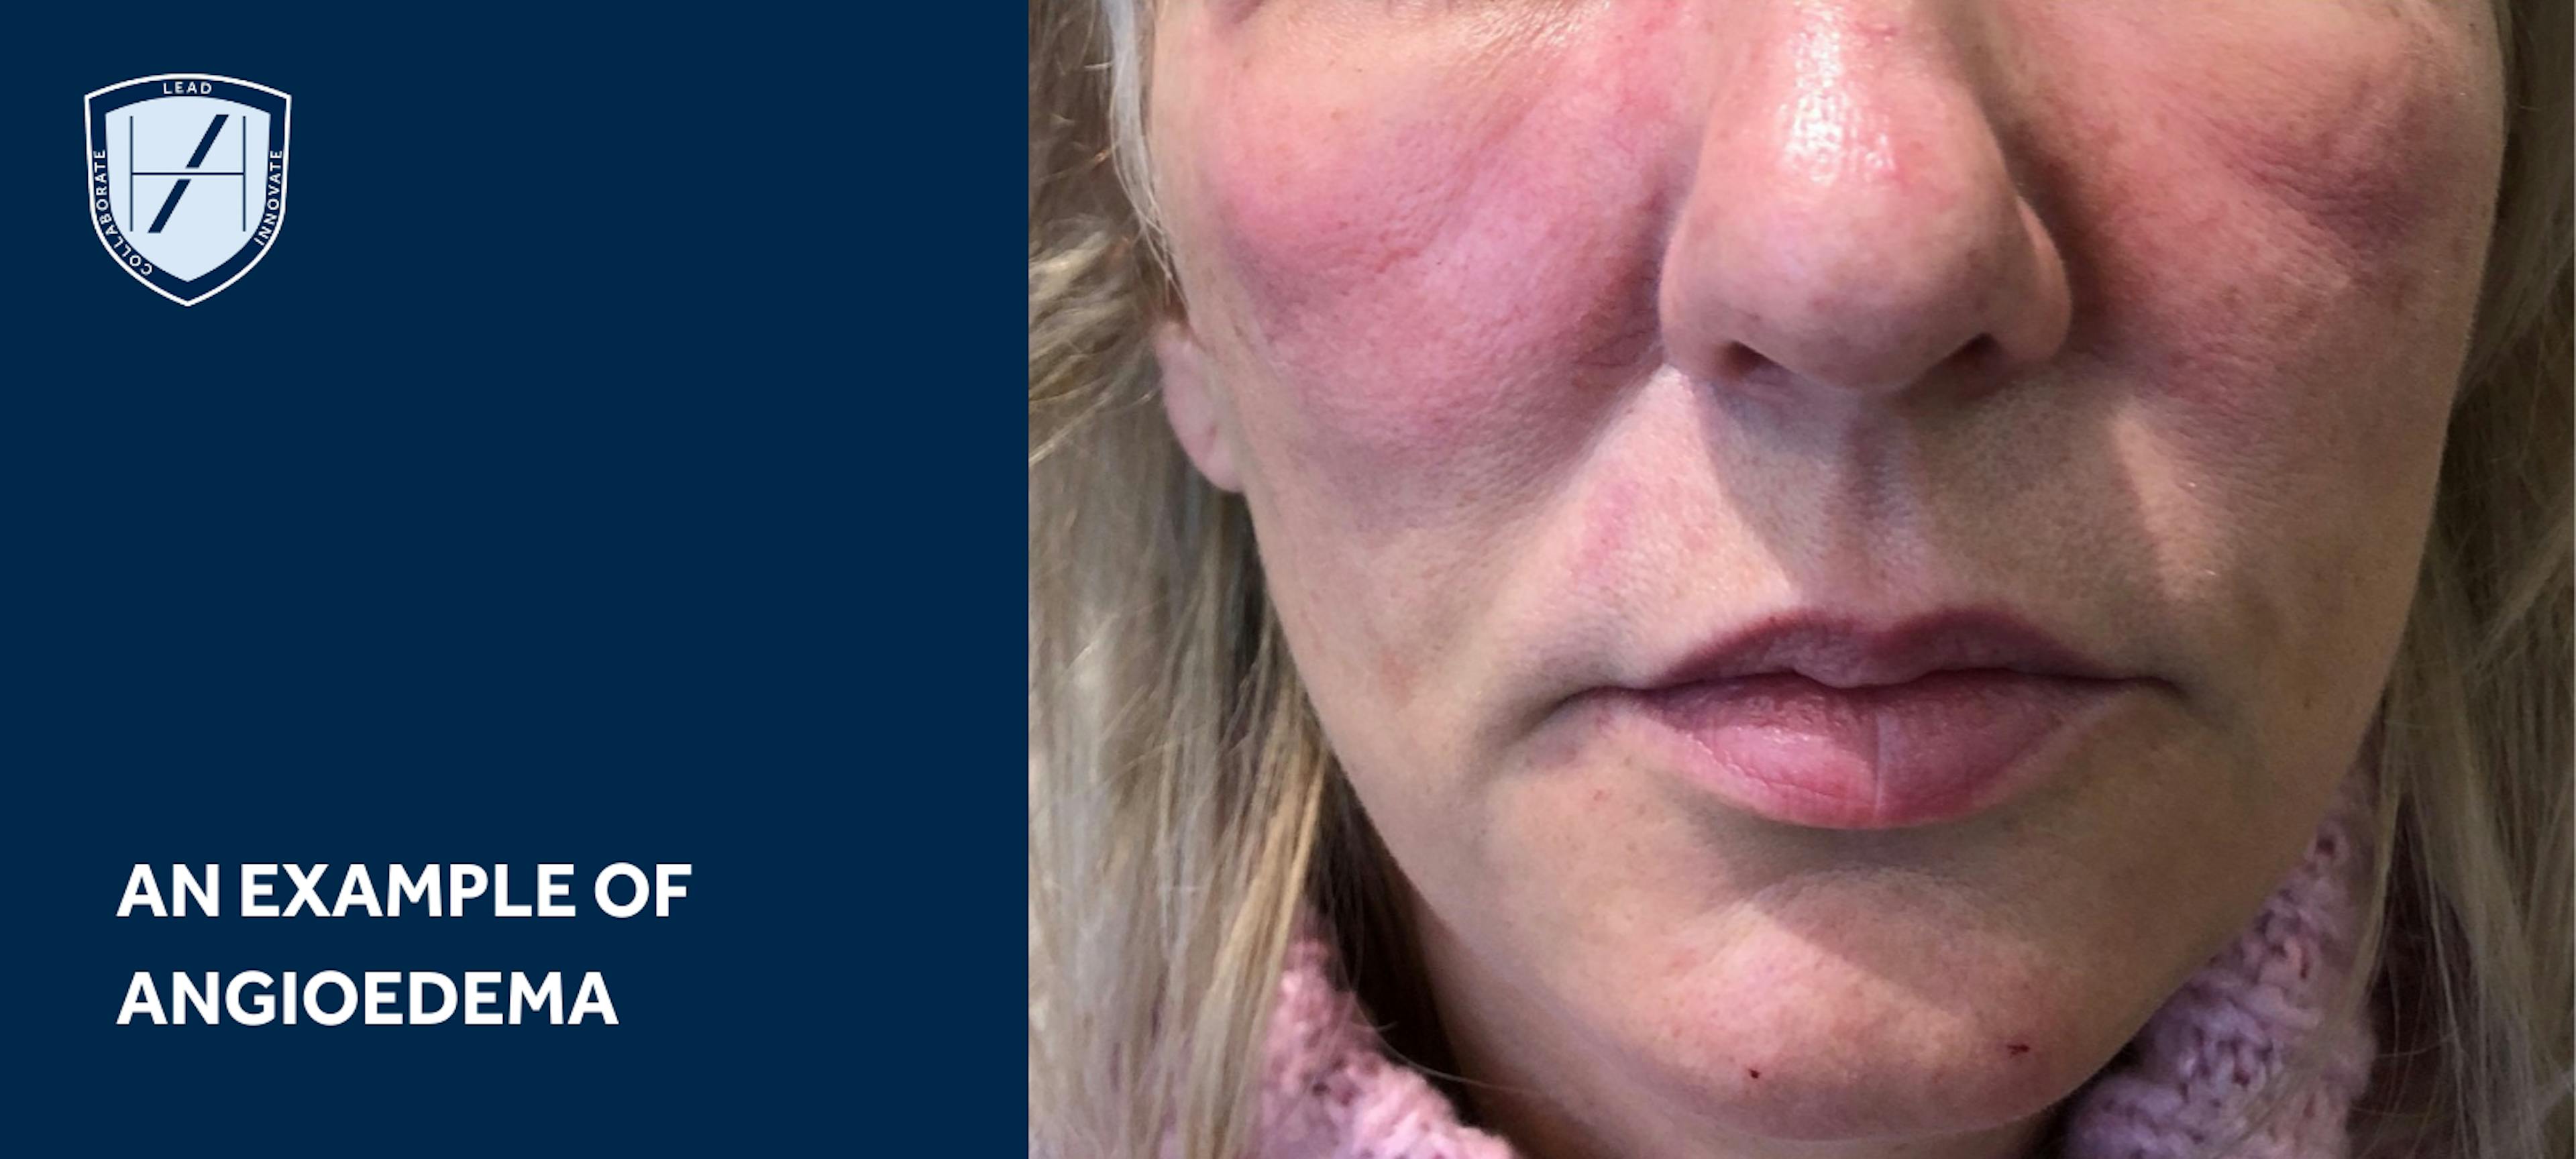 AN EXAMPLE OF angioedema dermal filler complications